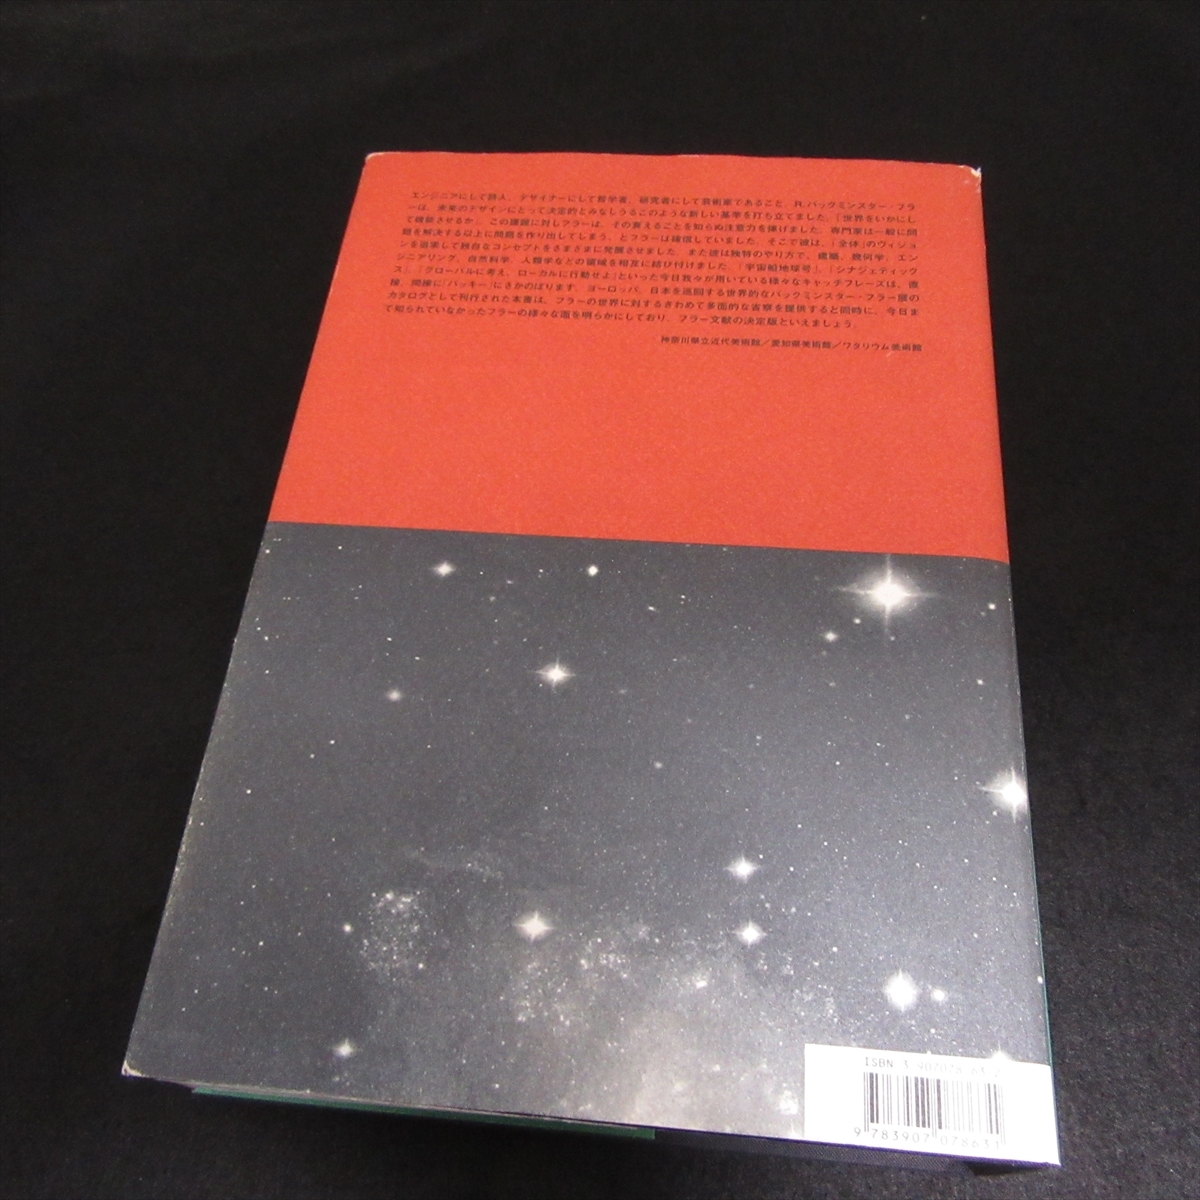  cover scratch . have * out of print rare book@[yua* private * Sky back min Star *fla-] # free shipping Japanese edition art * design * science 